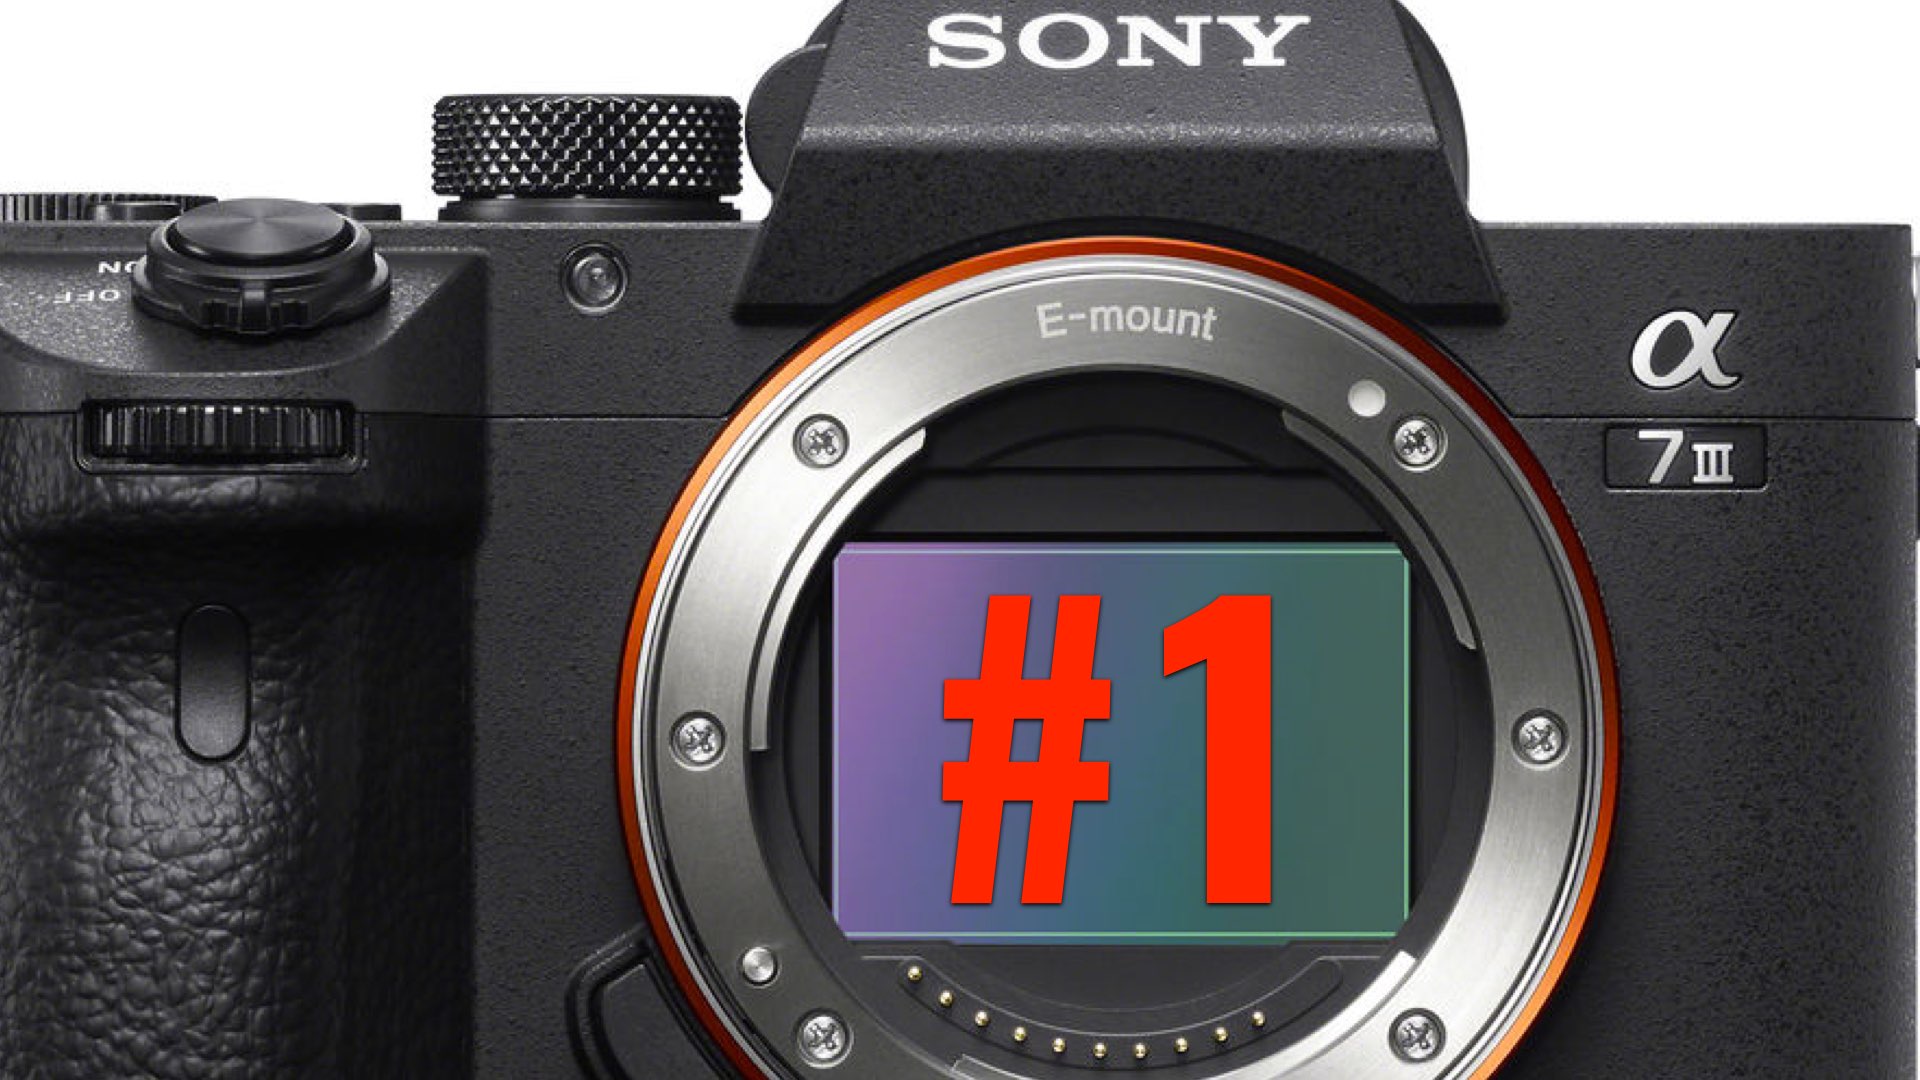 Sony Alpha 7 III is the Most Popular Full-Frame Mirrorless